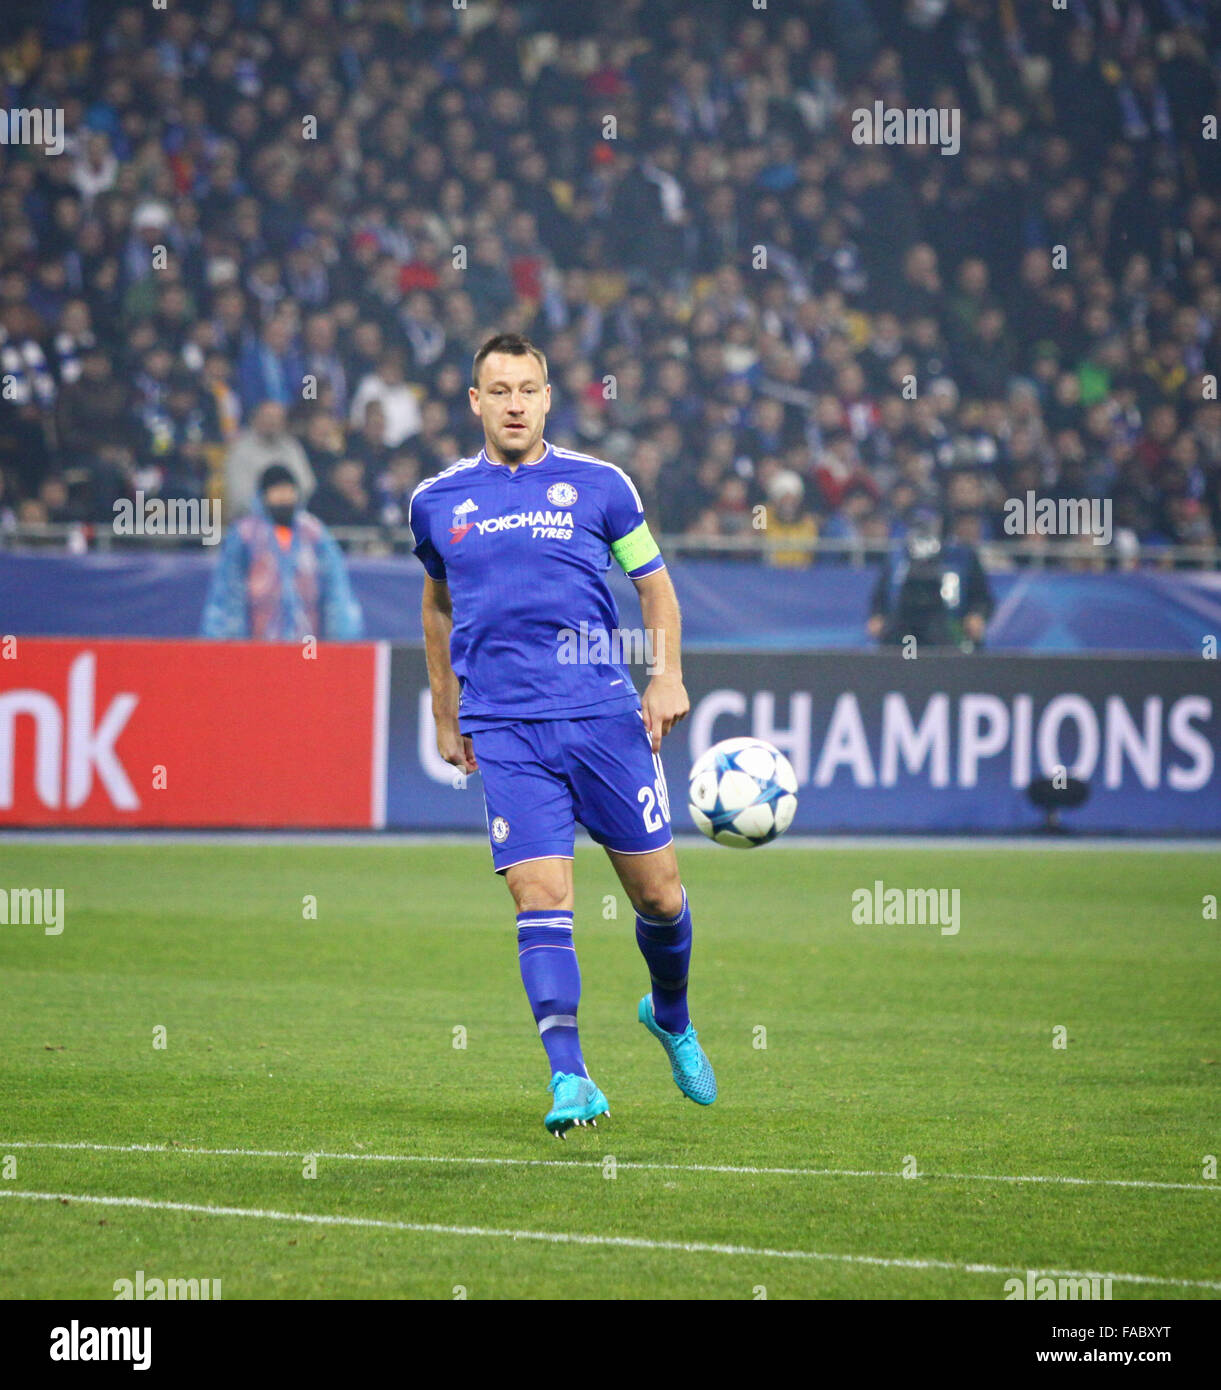 KYIV, UKRAINE - OCTOBER 20, 2015: Captain John Terry of Chelsea in action during UEFA Champions League game against FC Dynamo Ky Stock Photo